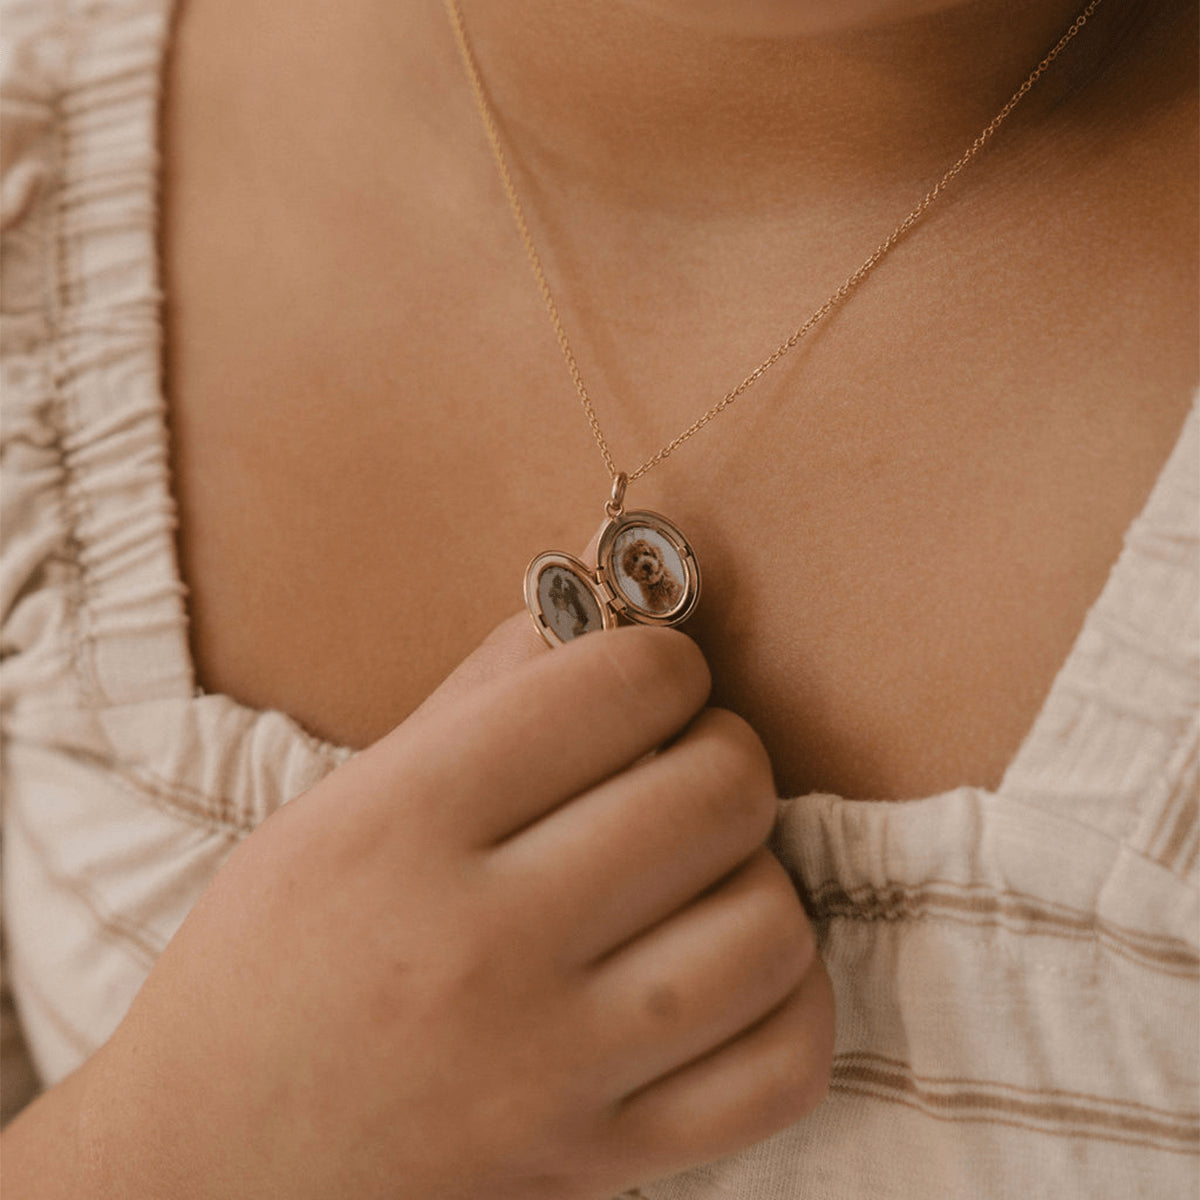 Gold Locket Necklace That Holds Pictures Photo Locket Necklace for Women  Flower Locket Necklaces for Girls Round Pendant Necklace with Picture  Inside